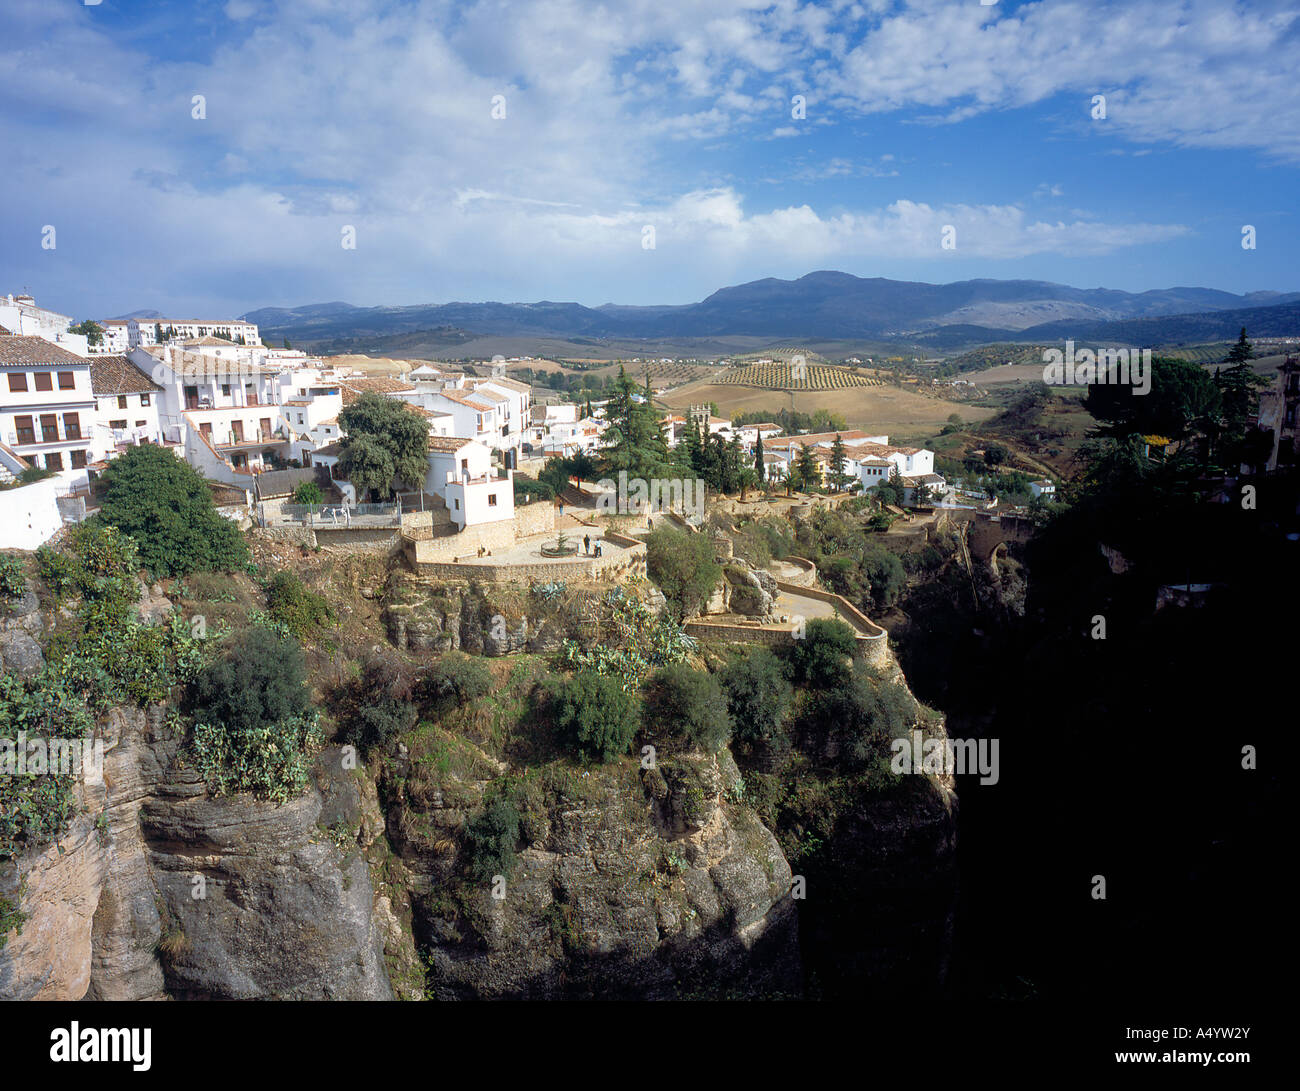 Gorge of Guadalevin Village Ronda Region of Andalusia Province Malaga Spain Espania Europe. Photo by Willy Matheisl Stock Photo